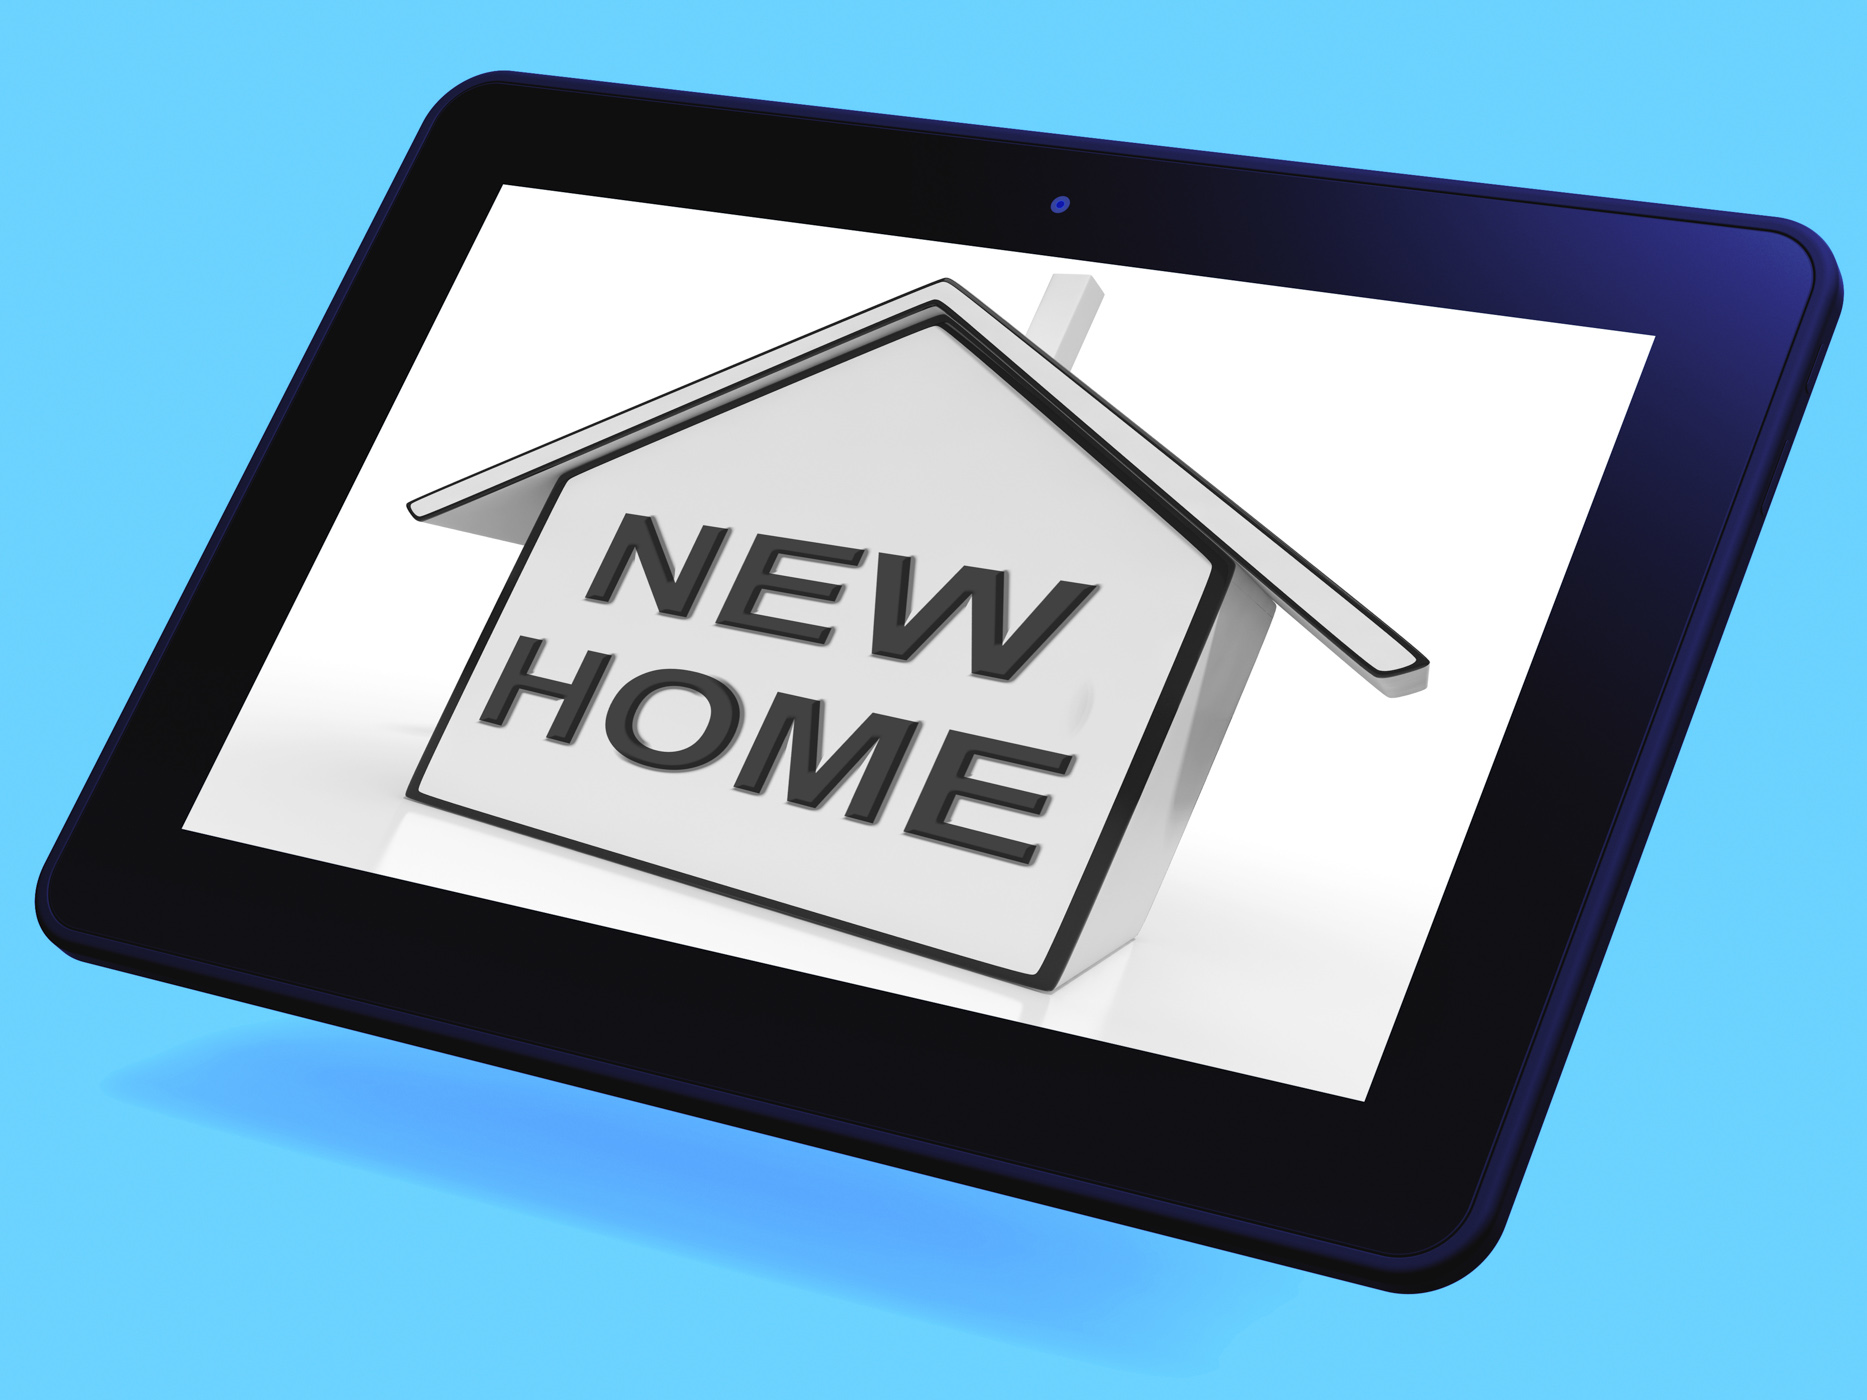 New home house tablet means buying or purchasing property photo